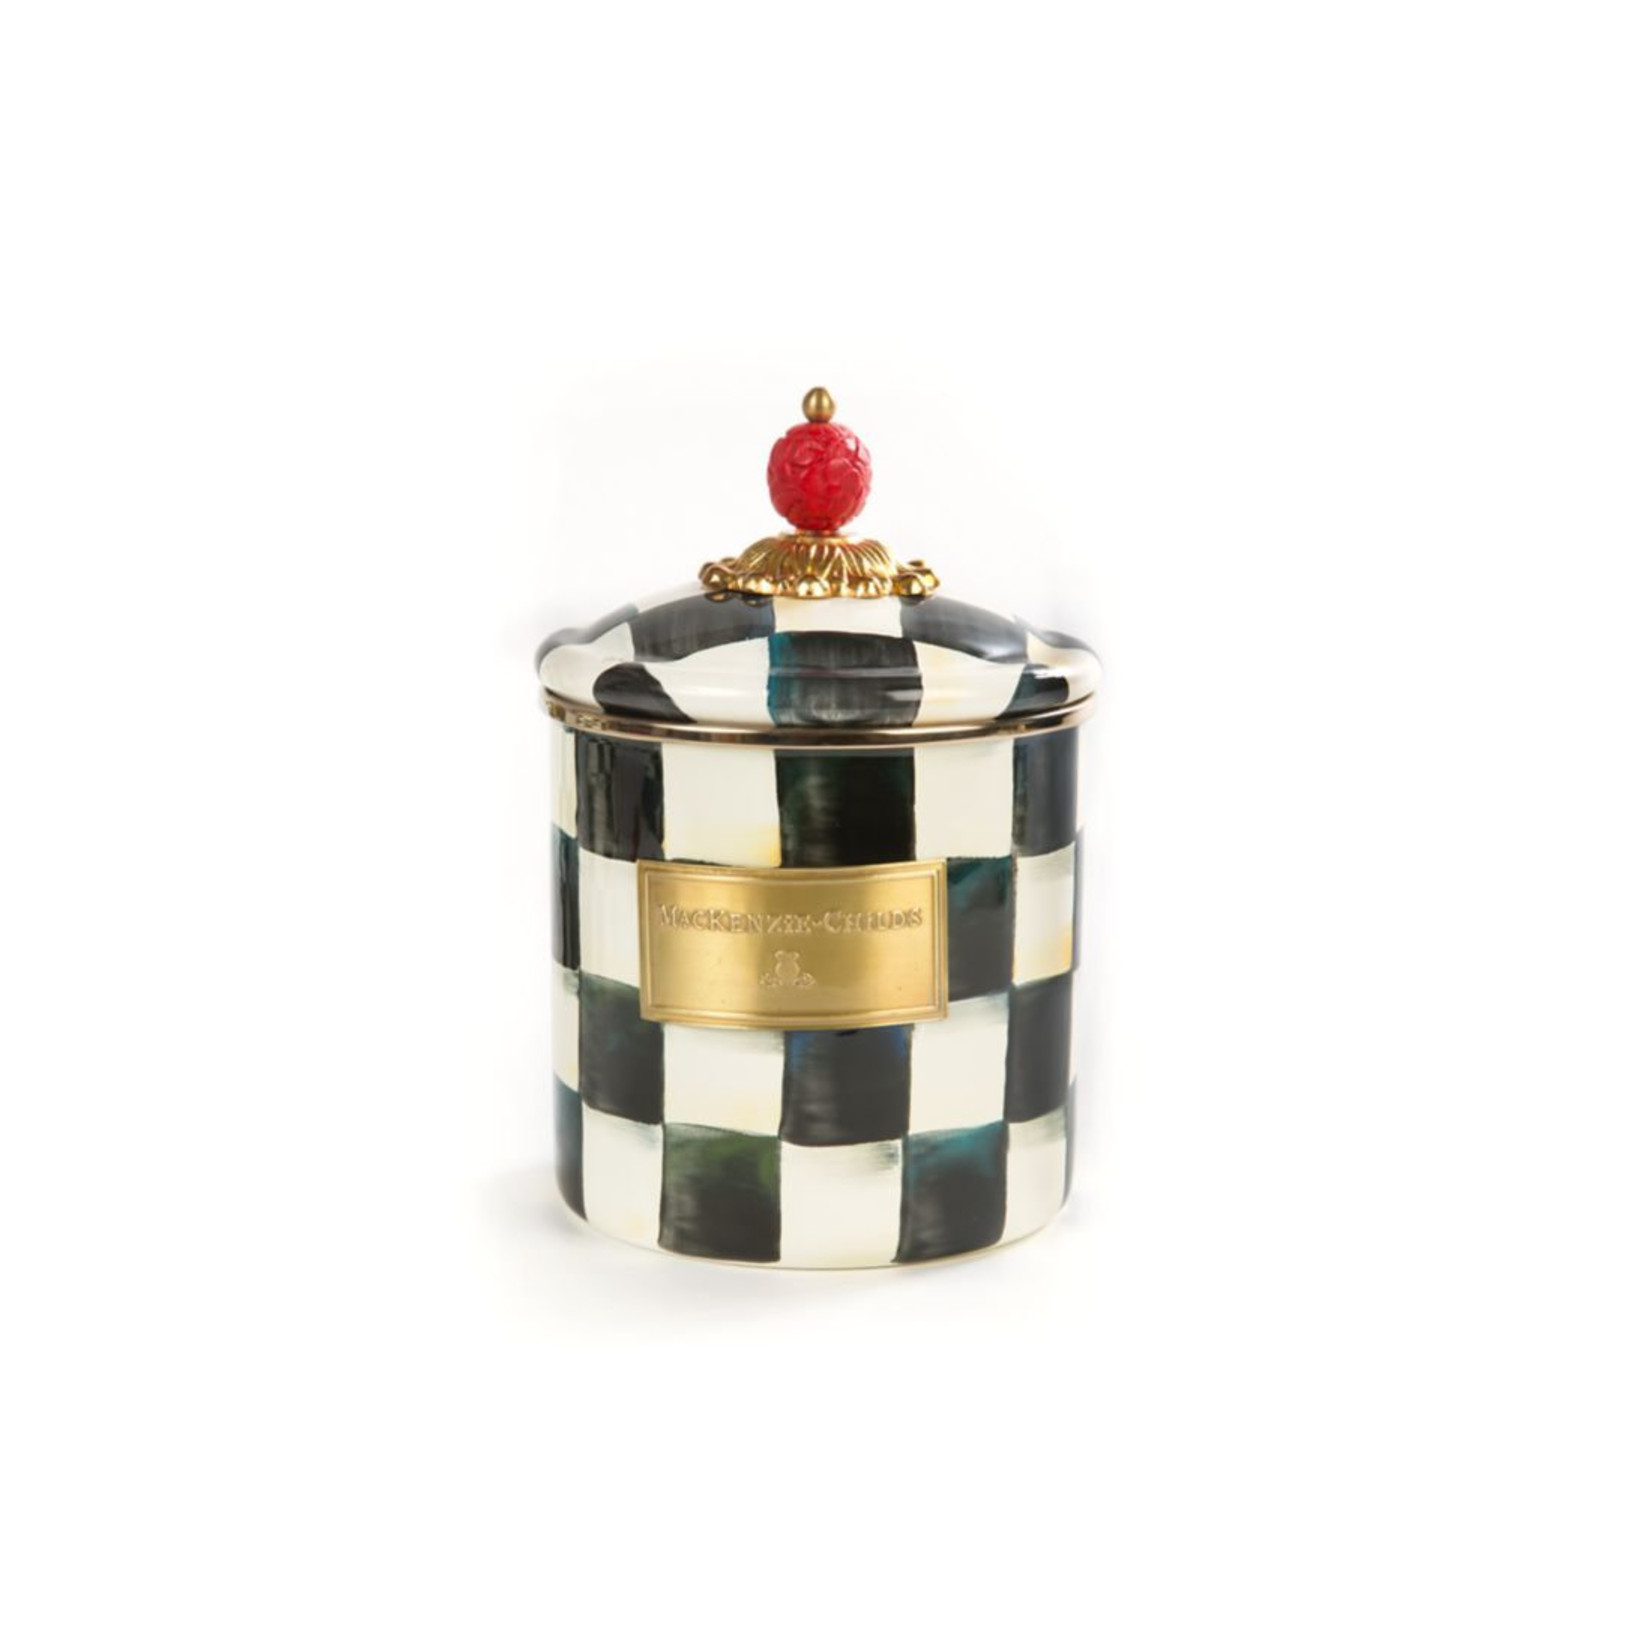 MacKenzie Childs Courtly Check Enamel Canister - Small